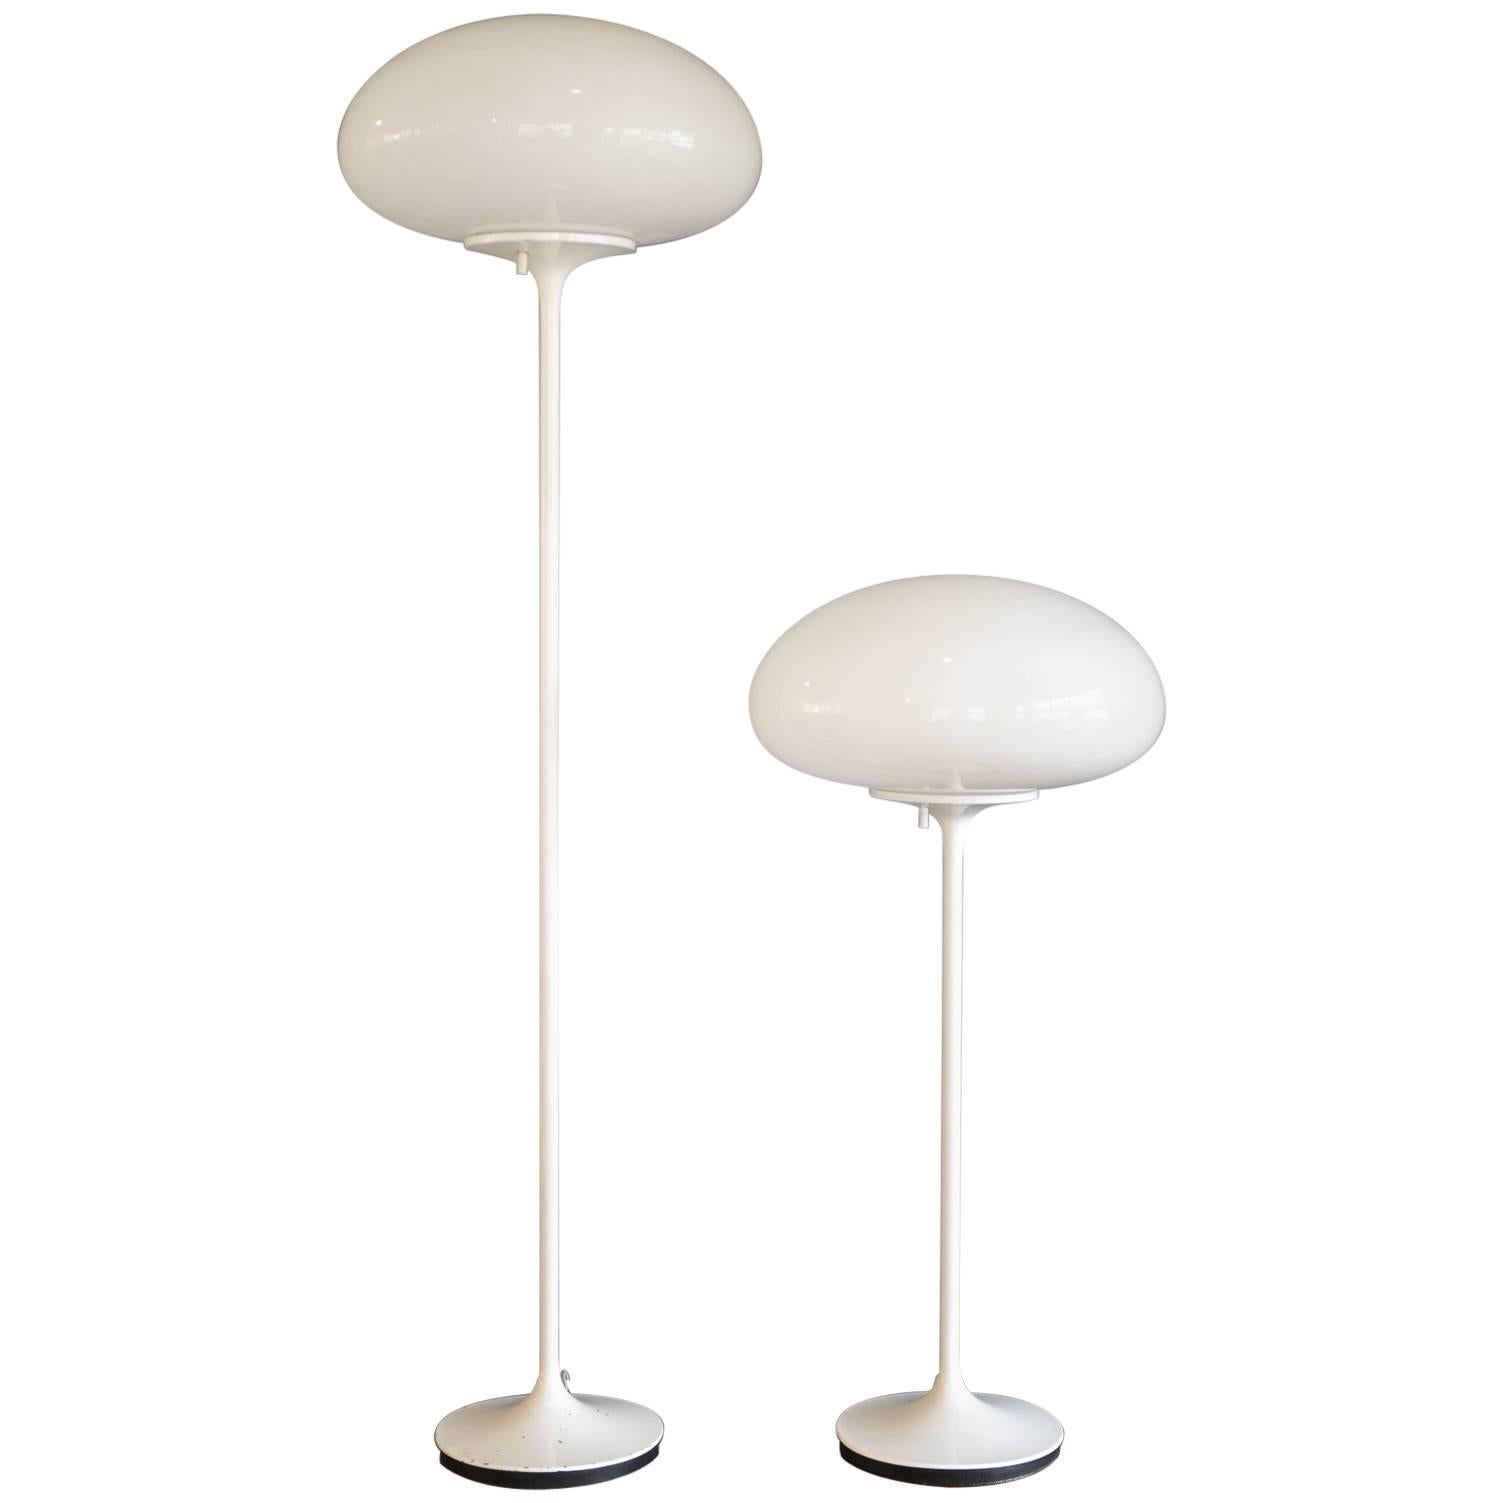 Pair of Bill Curry Stemlite for Design Line Mushroom Floor and Table Lamps